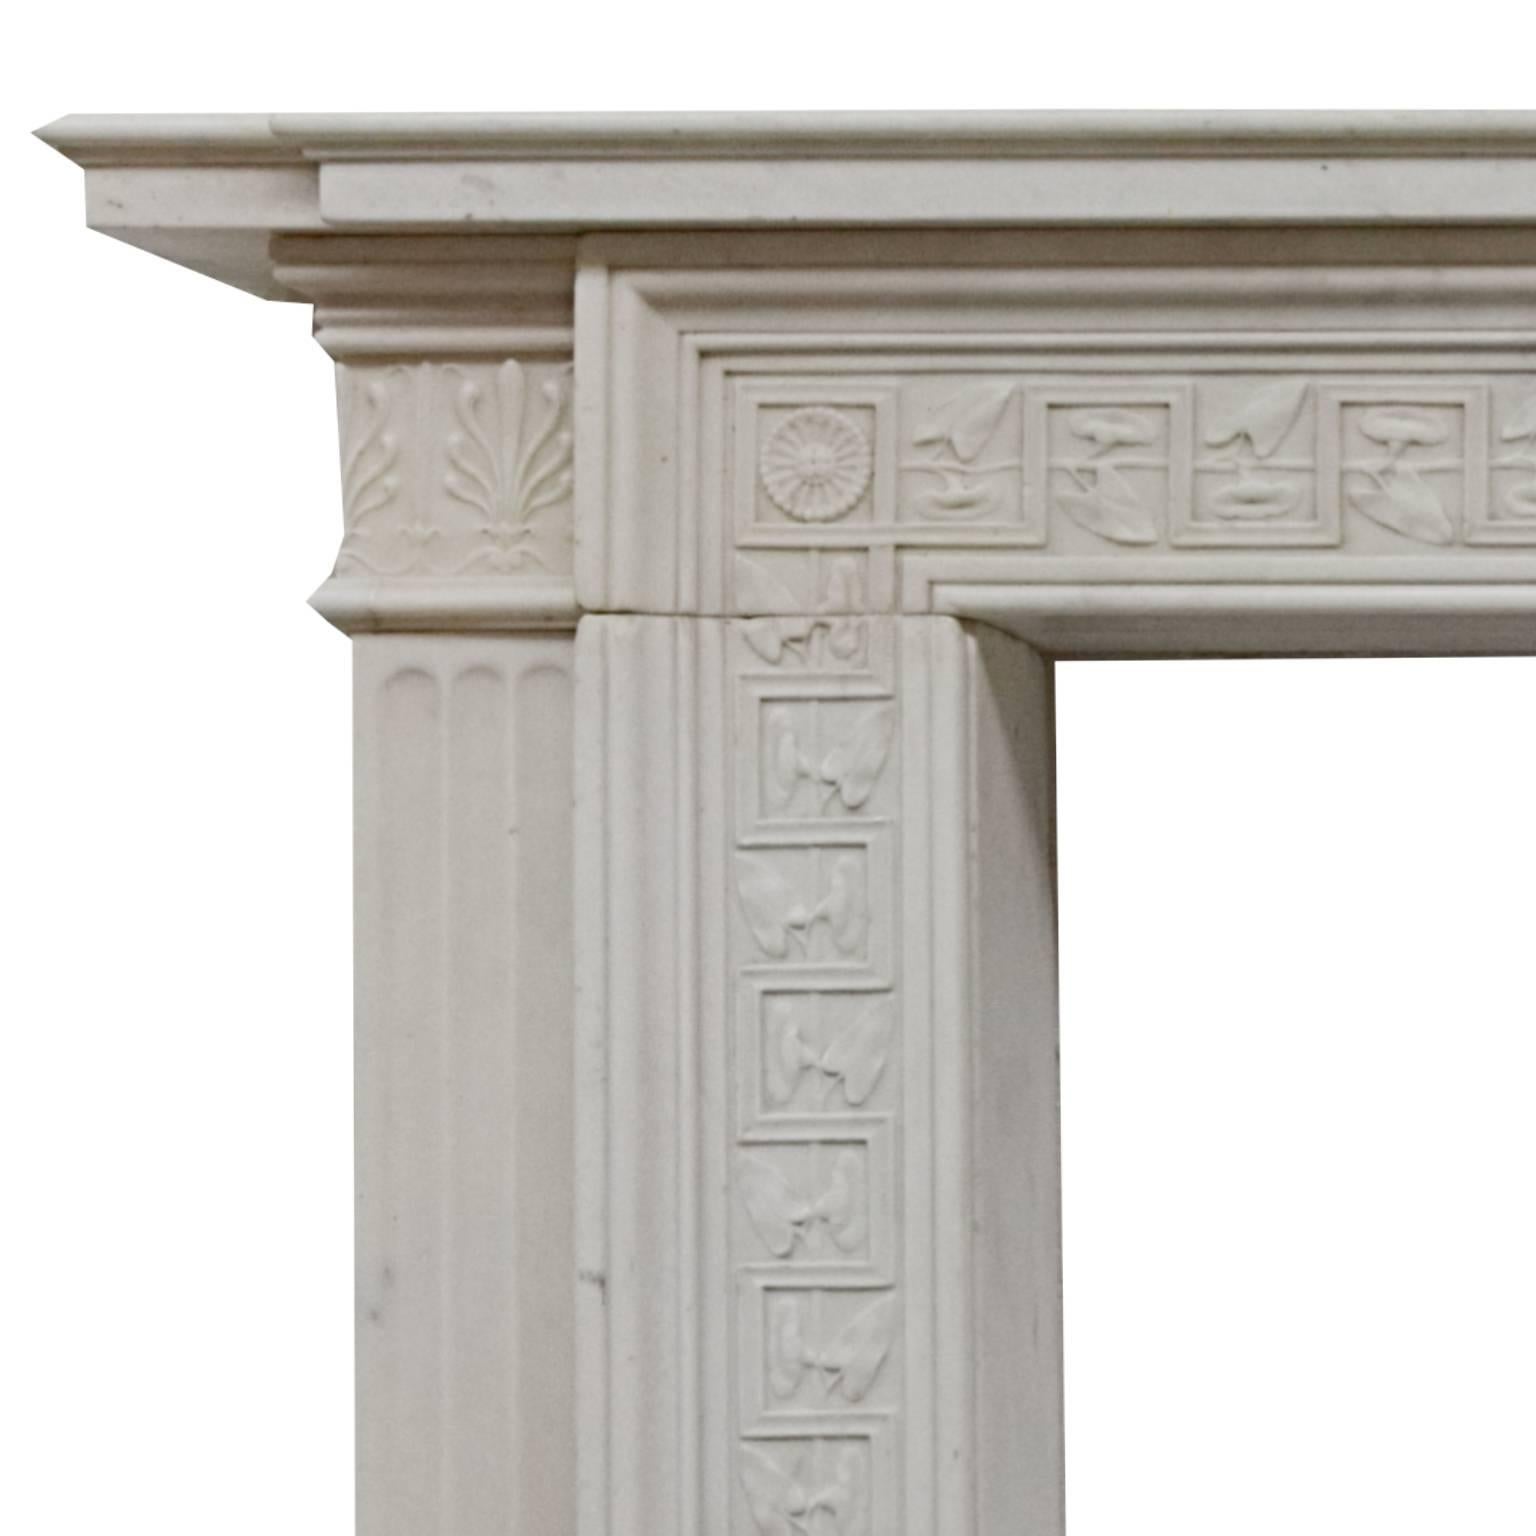 An elegant and exceptionally rare 19th century regency statuary marble mantelpiece. Believed to be an original sir John Soane fireplace.
Salvaged from a derelict London town house during its renovation period, and discovered behind a wooden covered